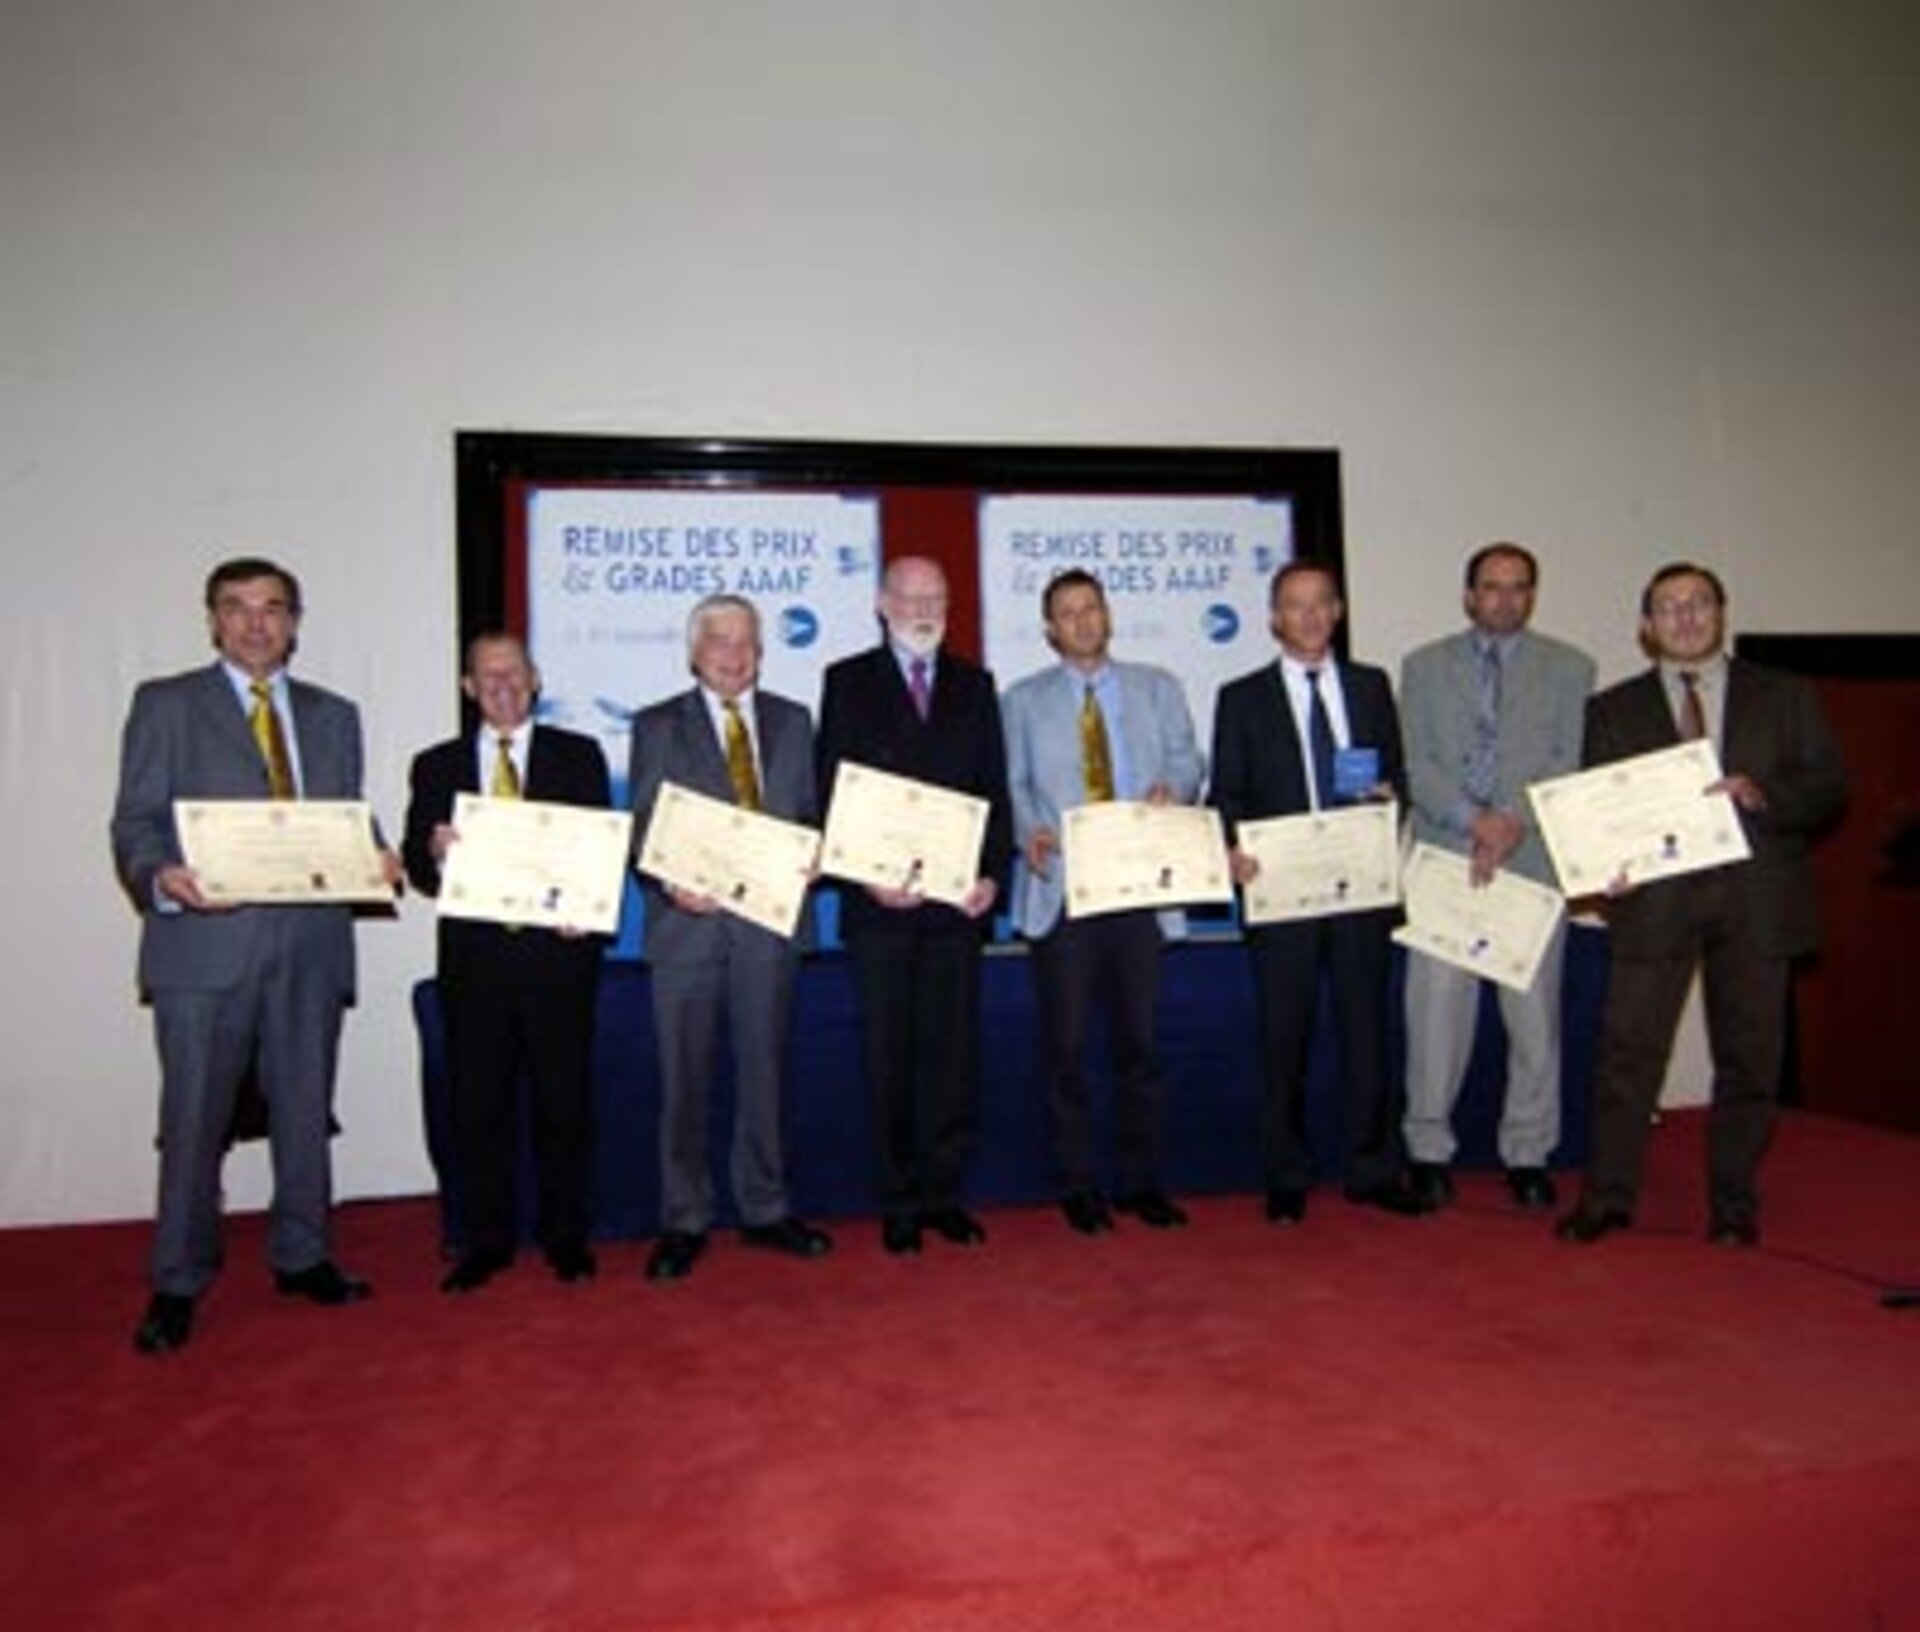 The ESA and EADS Astrium Mars Express teams were rewarded by AAAF